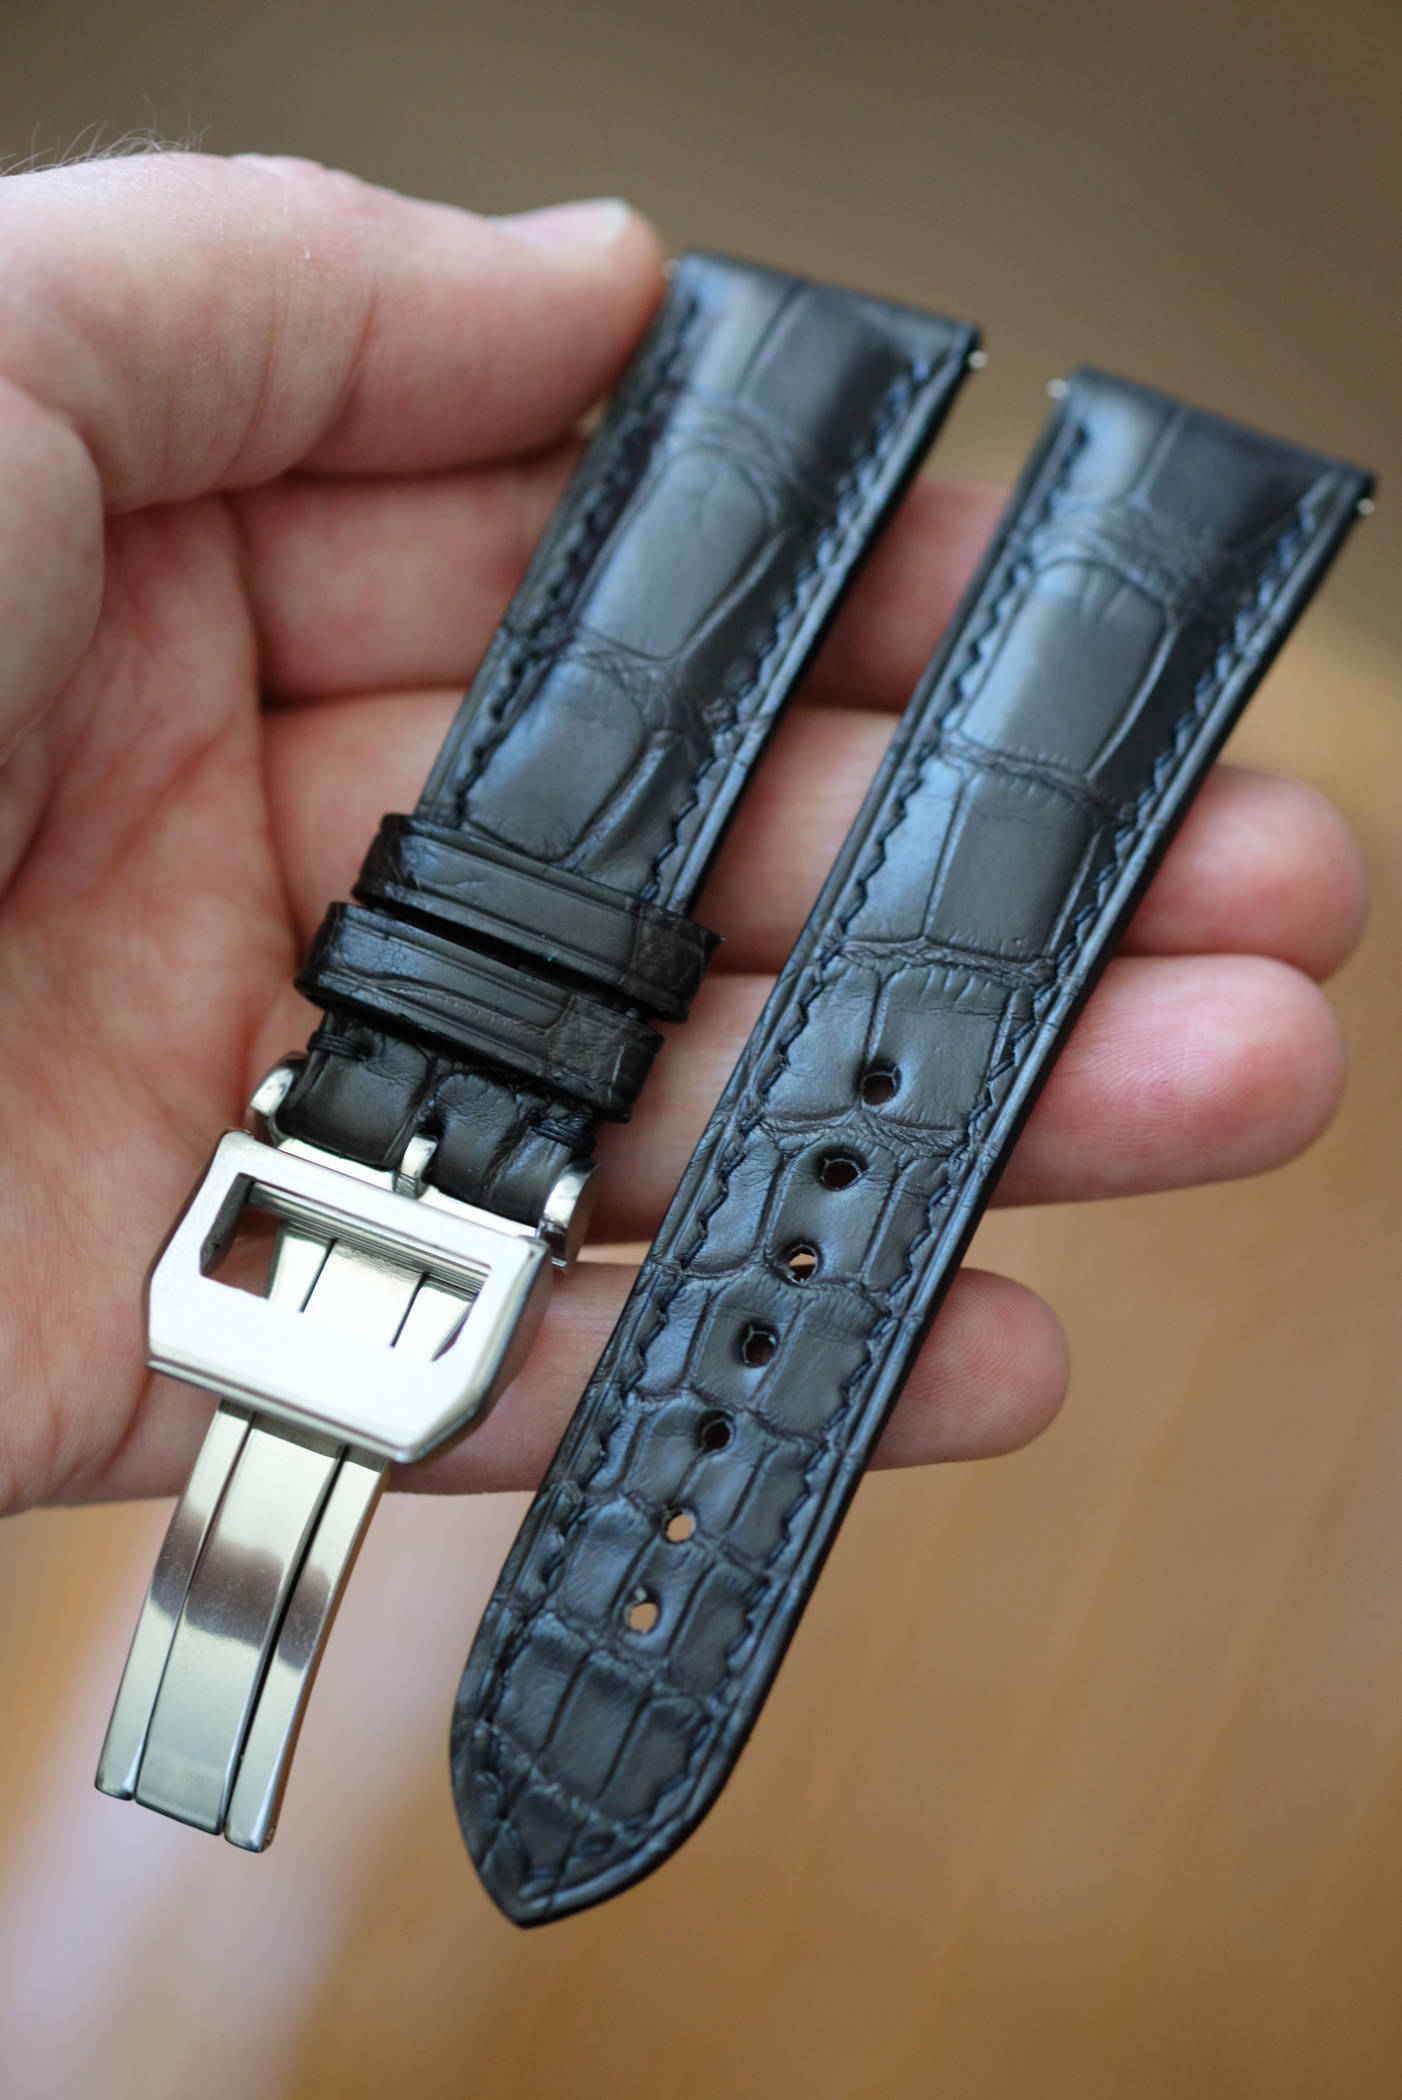 IWC-Style Deployment Clasp - Cavalier Goods Co.